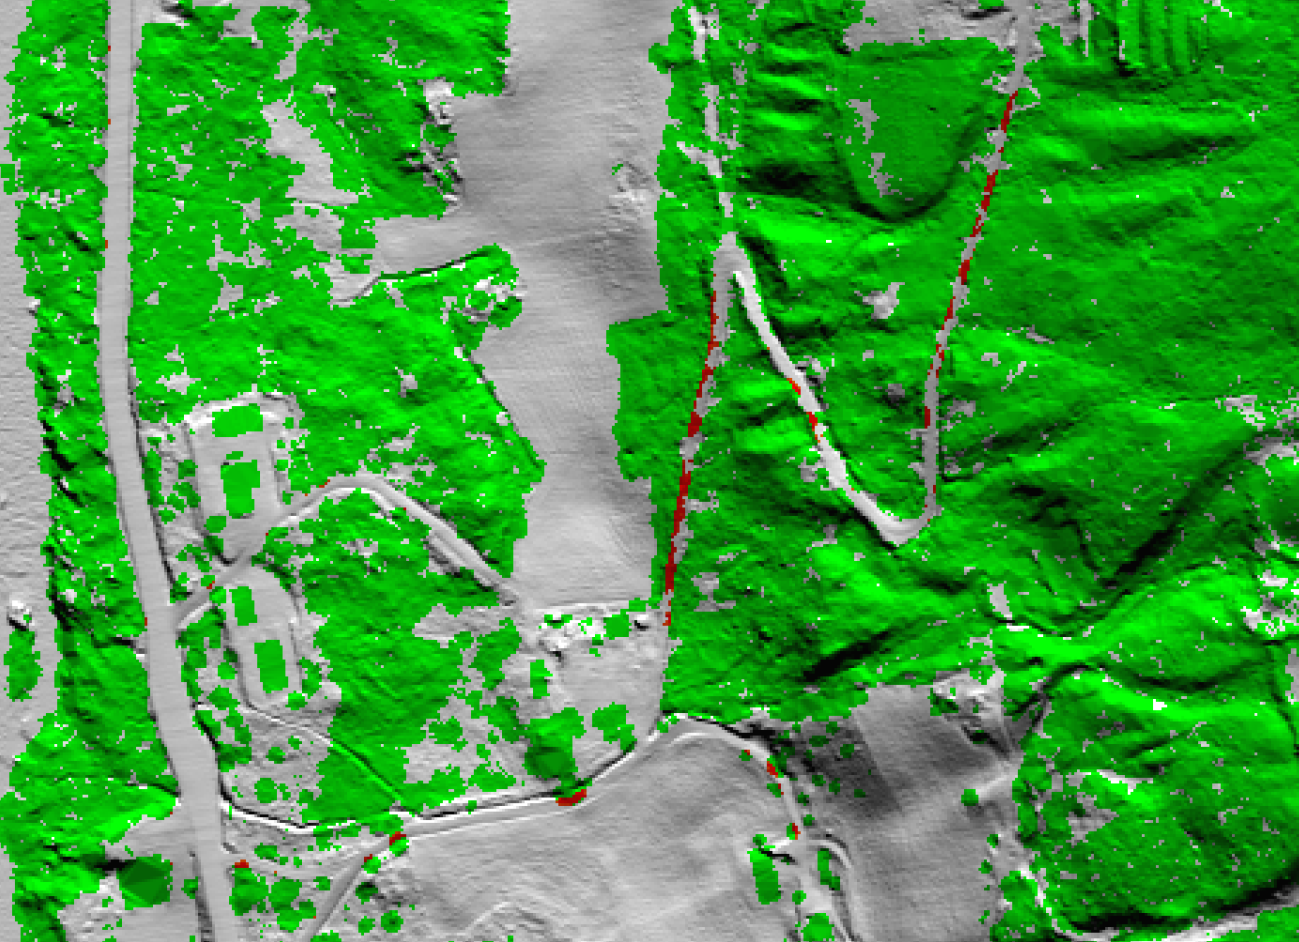 Result of automatic detection of overhanging vegetation along roads. Green: vegetation (and also buildings) higher than 1 m outside of roads. Red: vegetation higher than 1 m overlapping roads. White: No vegetation higher than 1 m.